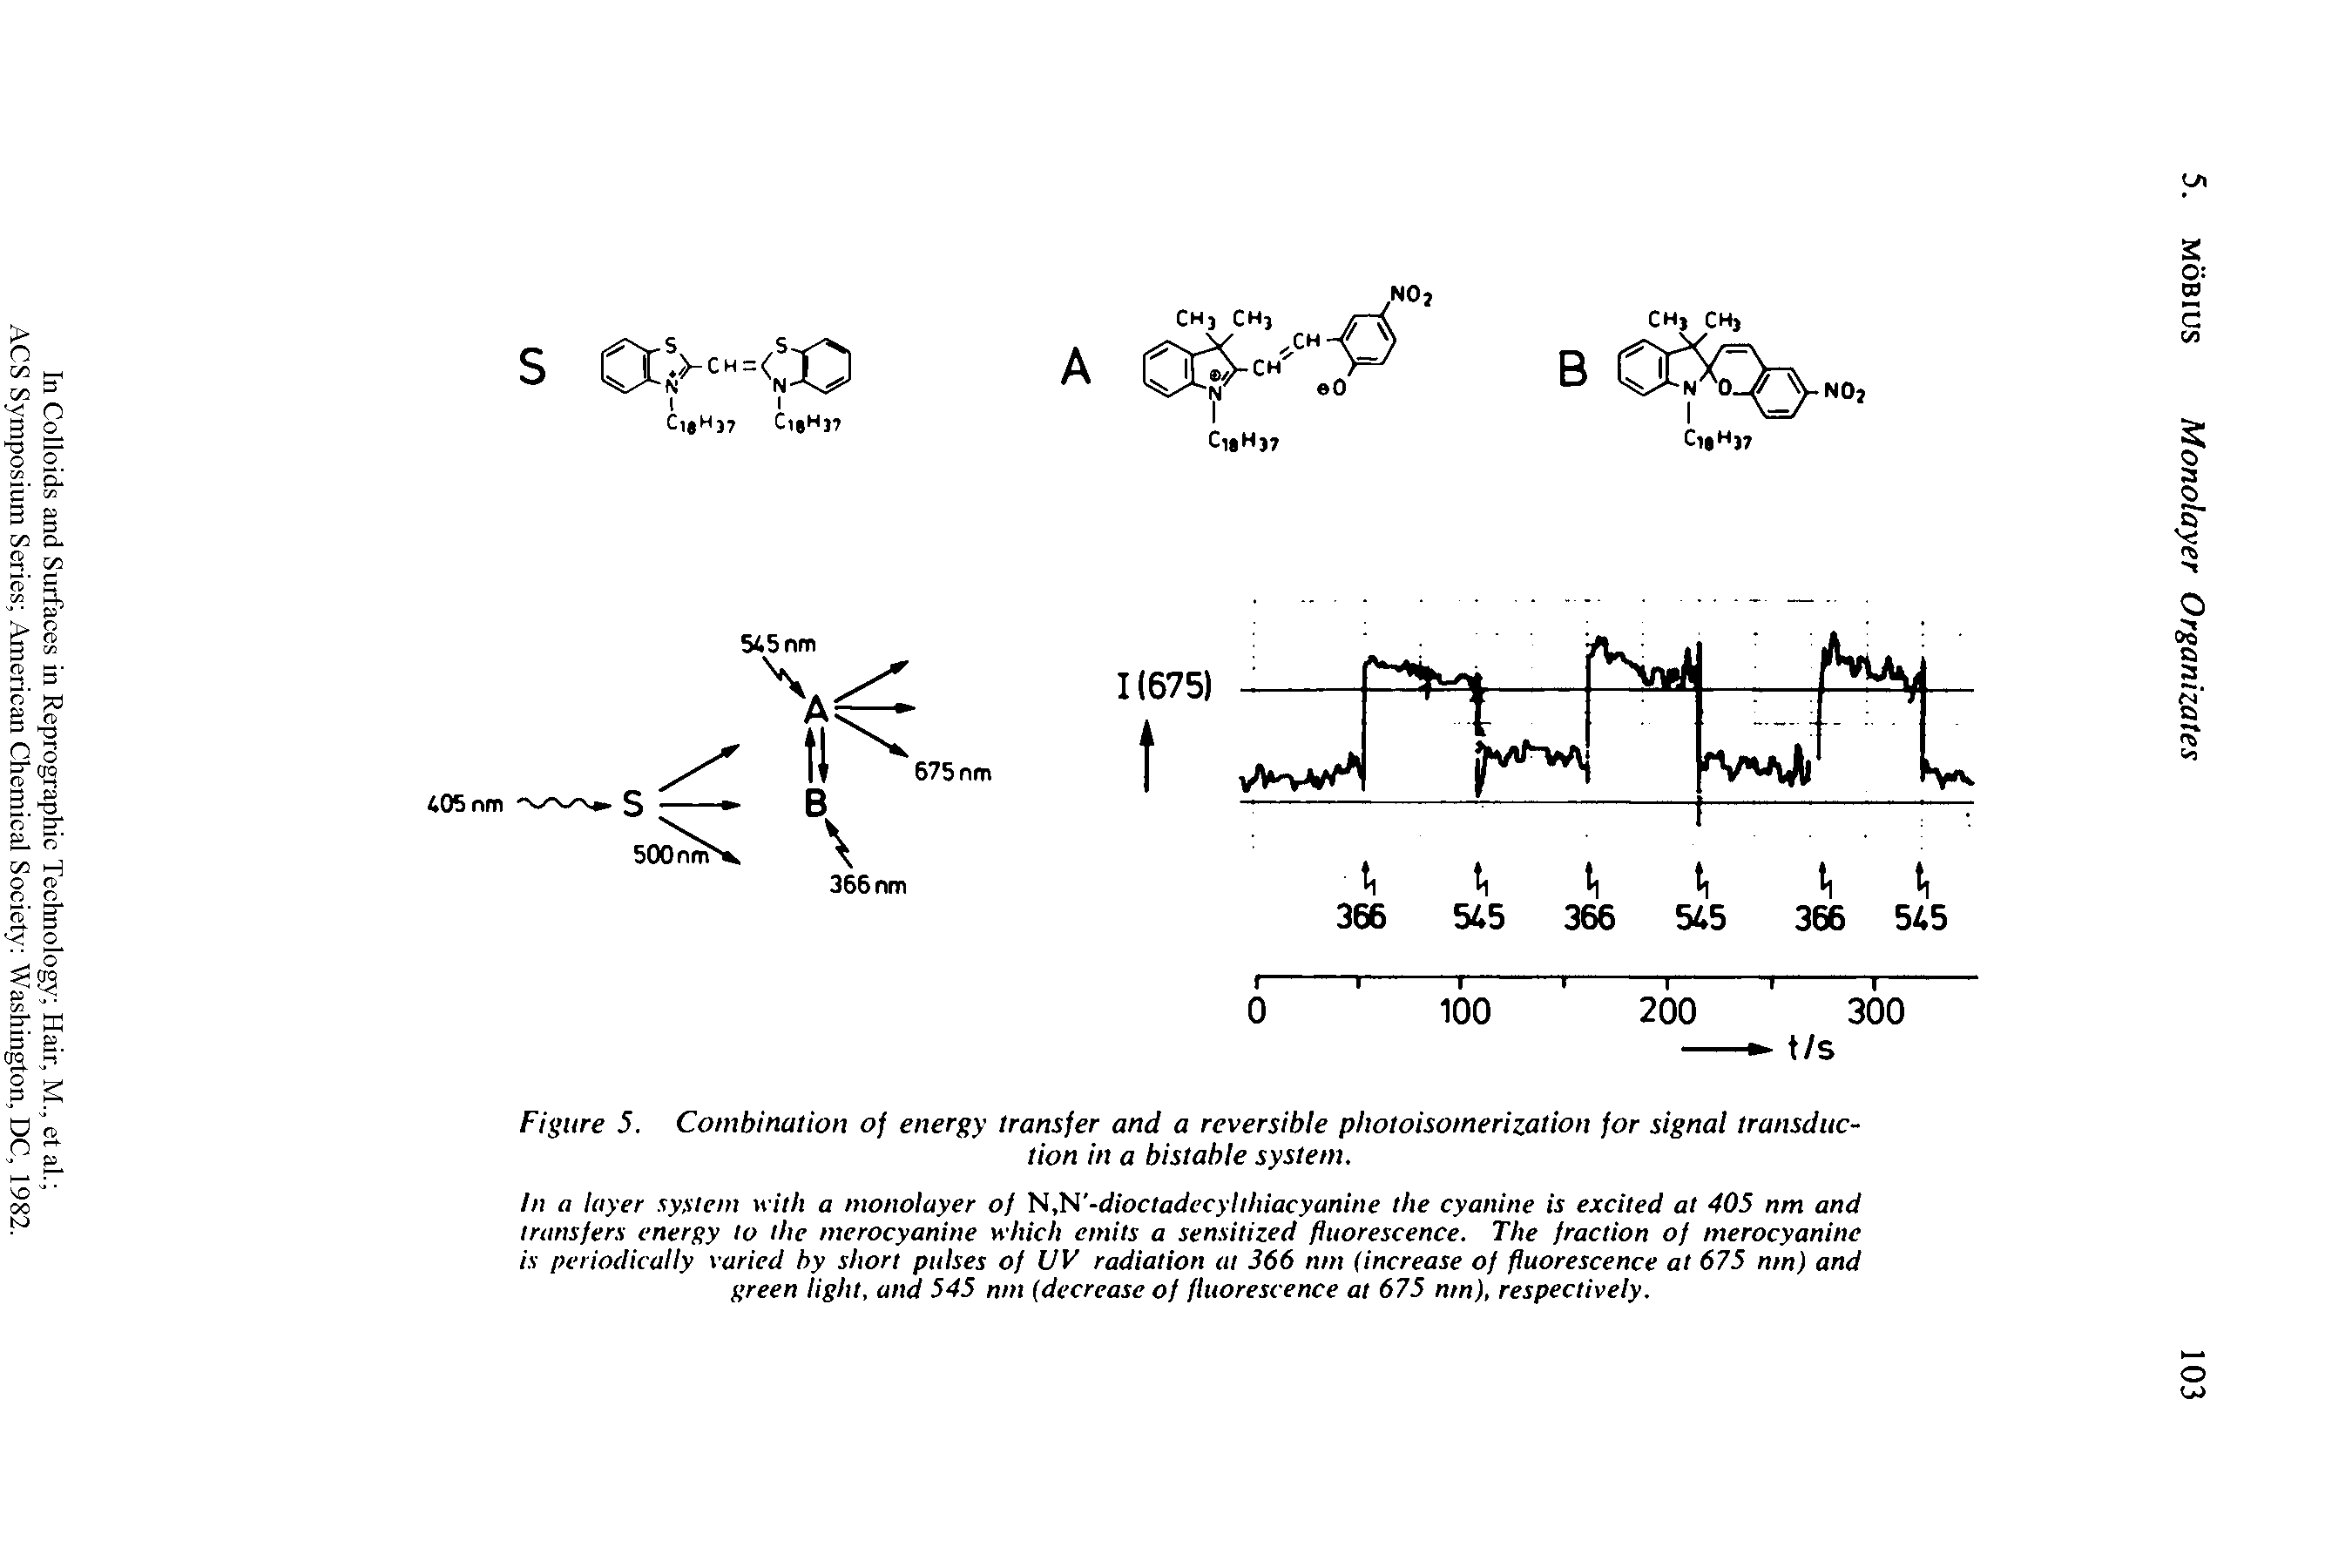 Figure 5. Combination of energy transfer and a reversible photoisomerization for signal transduction in a bistable system.